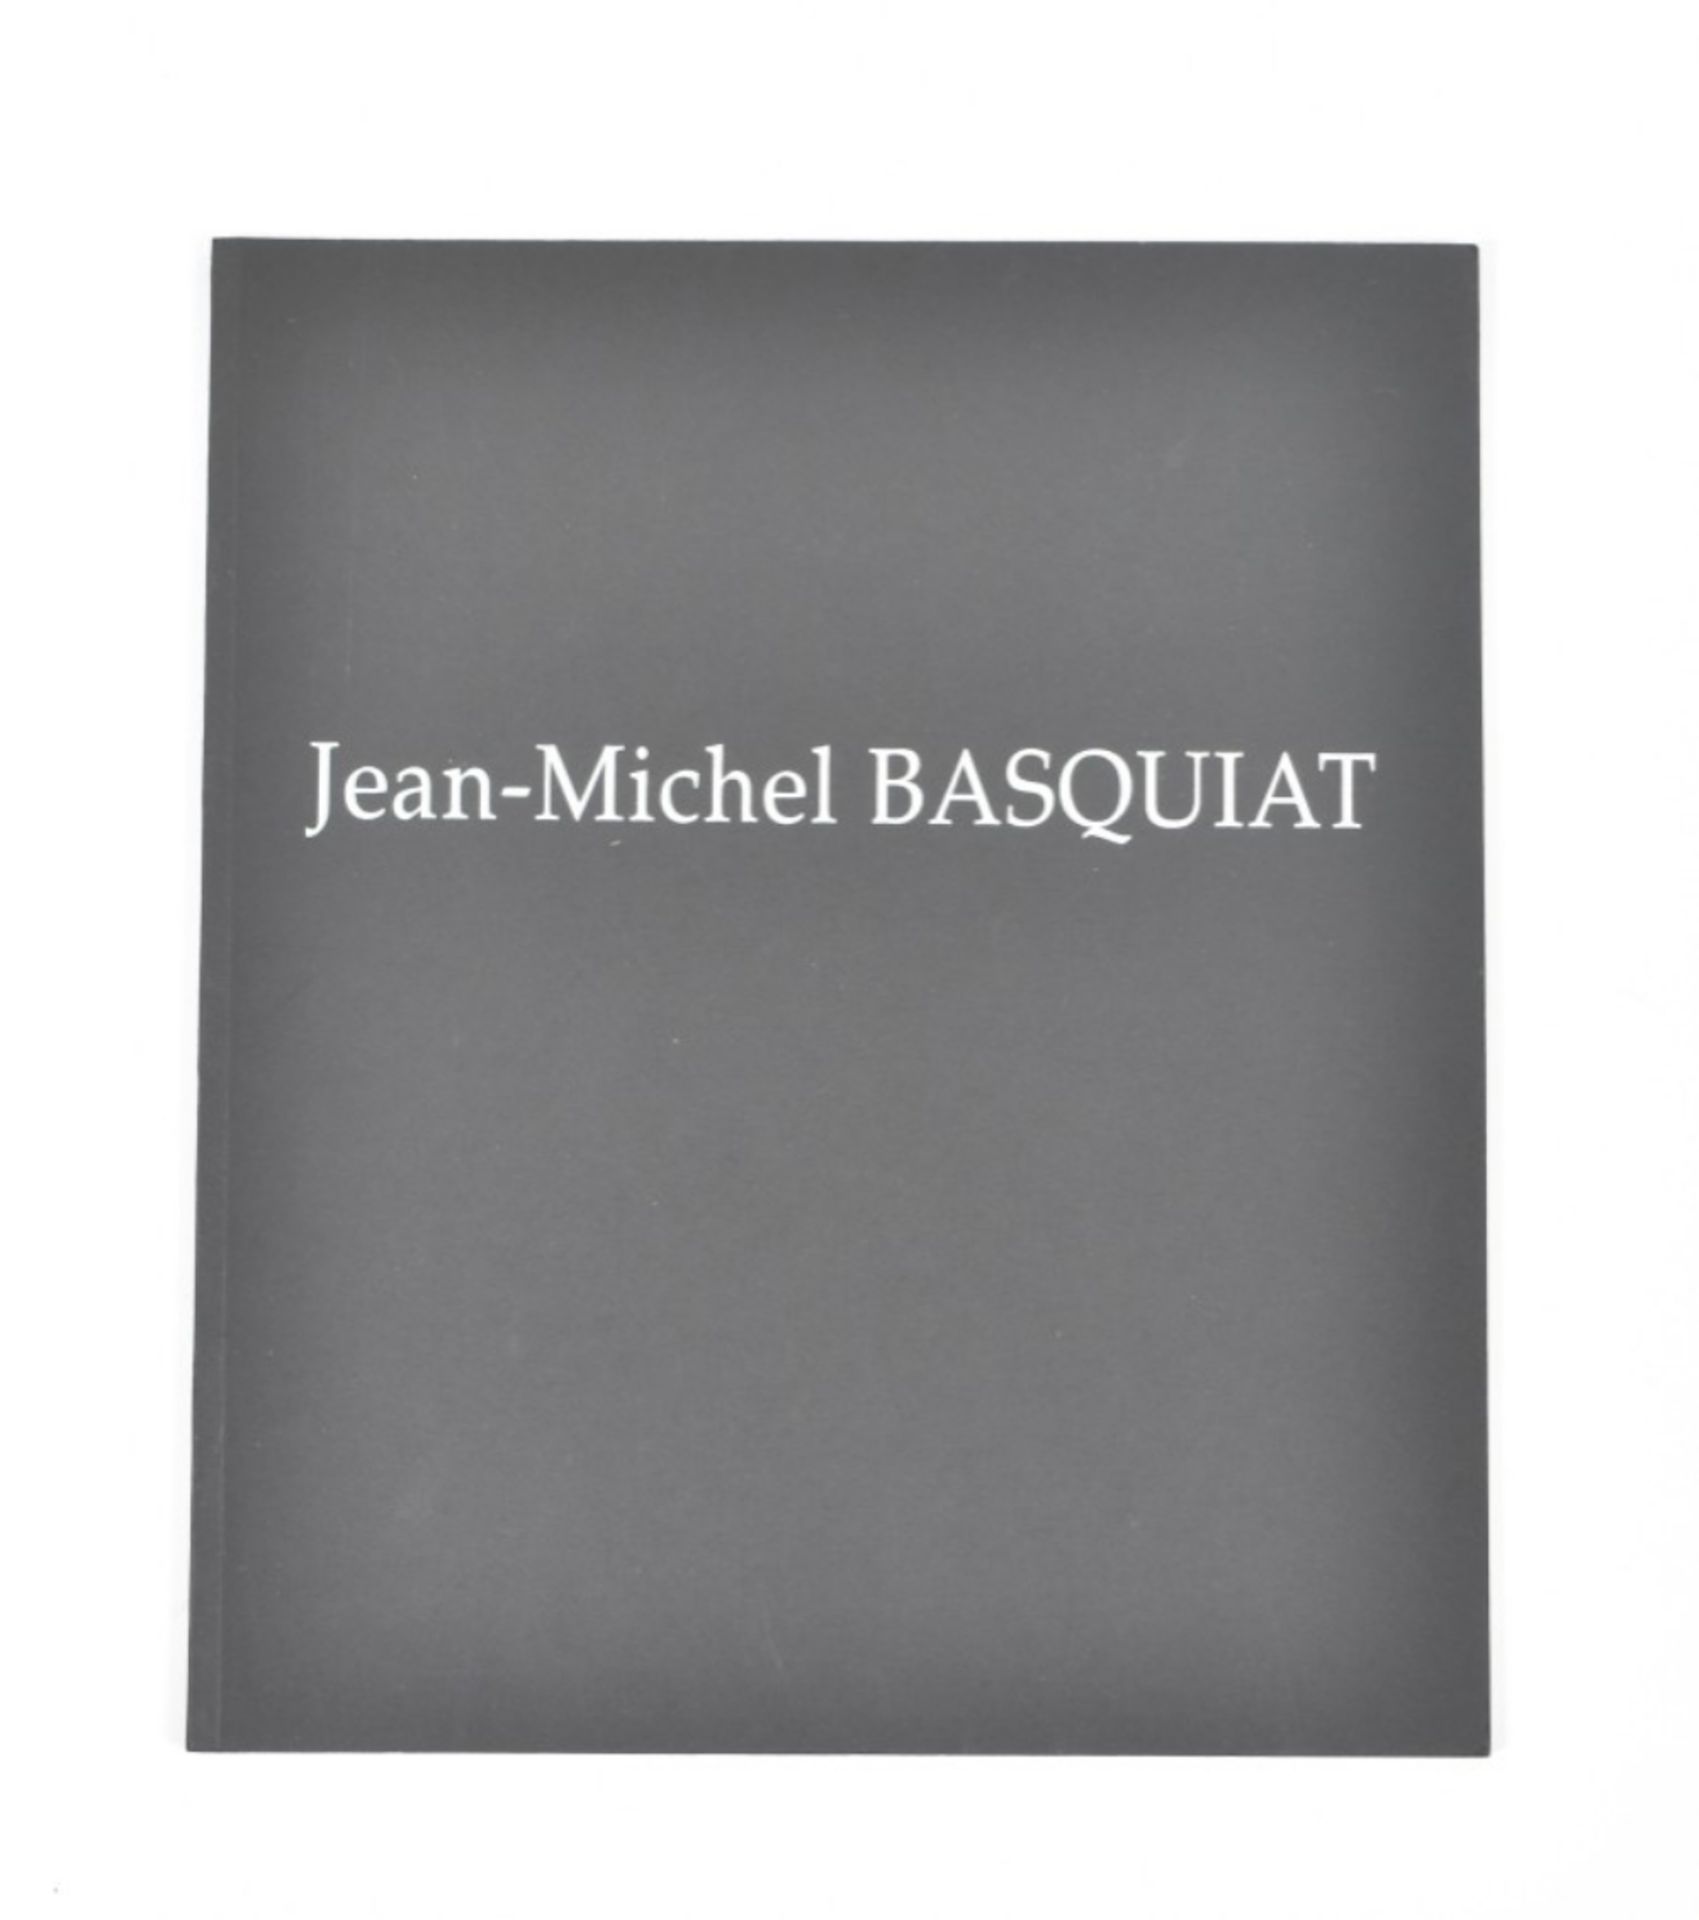 [s and up] Jean-Michel Basquiat 